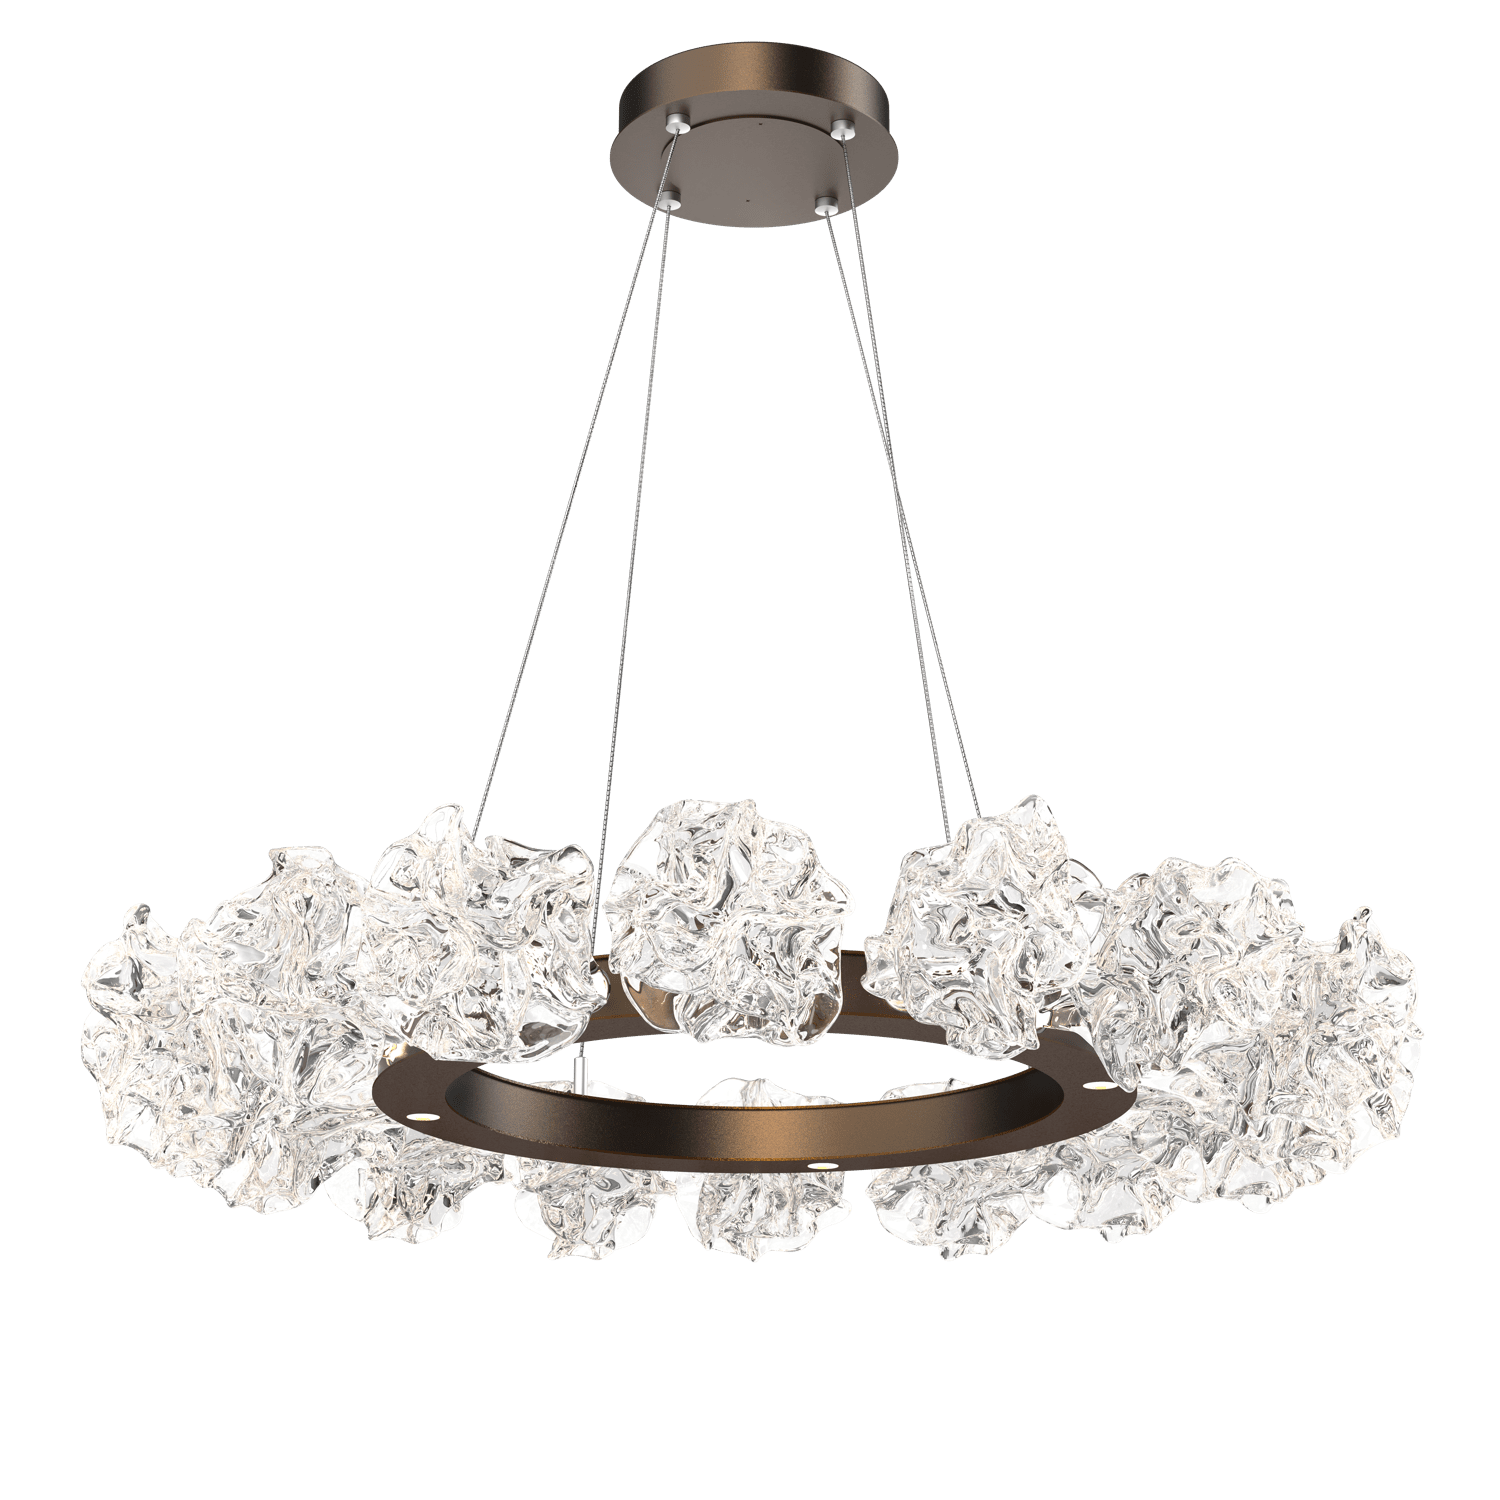 CHB0059-36-FB-Hammerton-Studio-Blossom-36-inch-radial-ring-chandelier-with-flat-bronze-finish-and-clear-handblown-crystal-glass-shades-and-LED-lamping